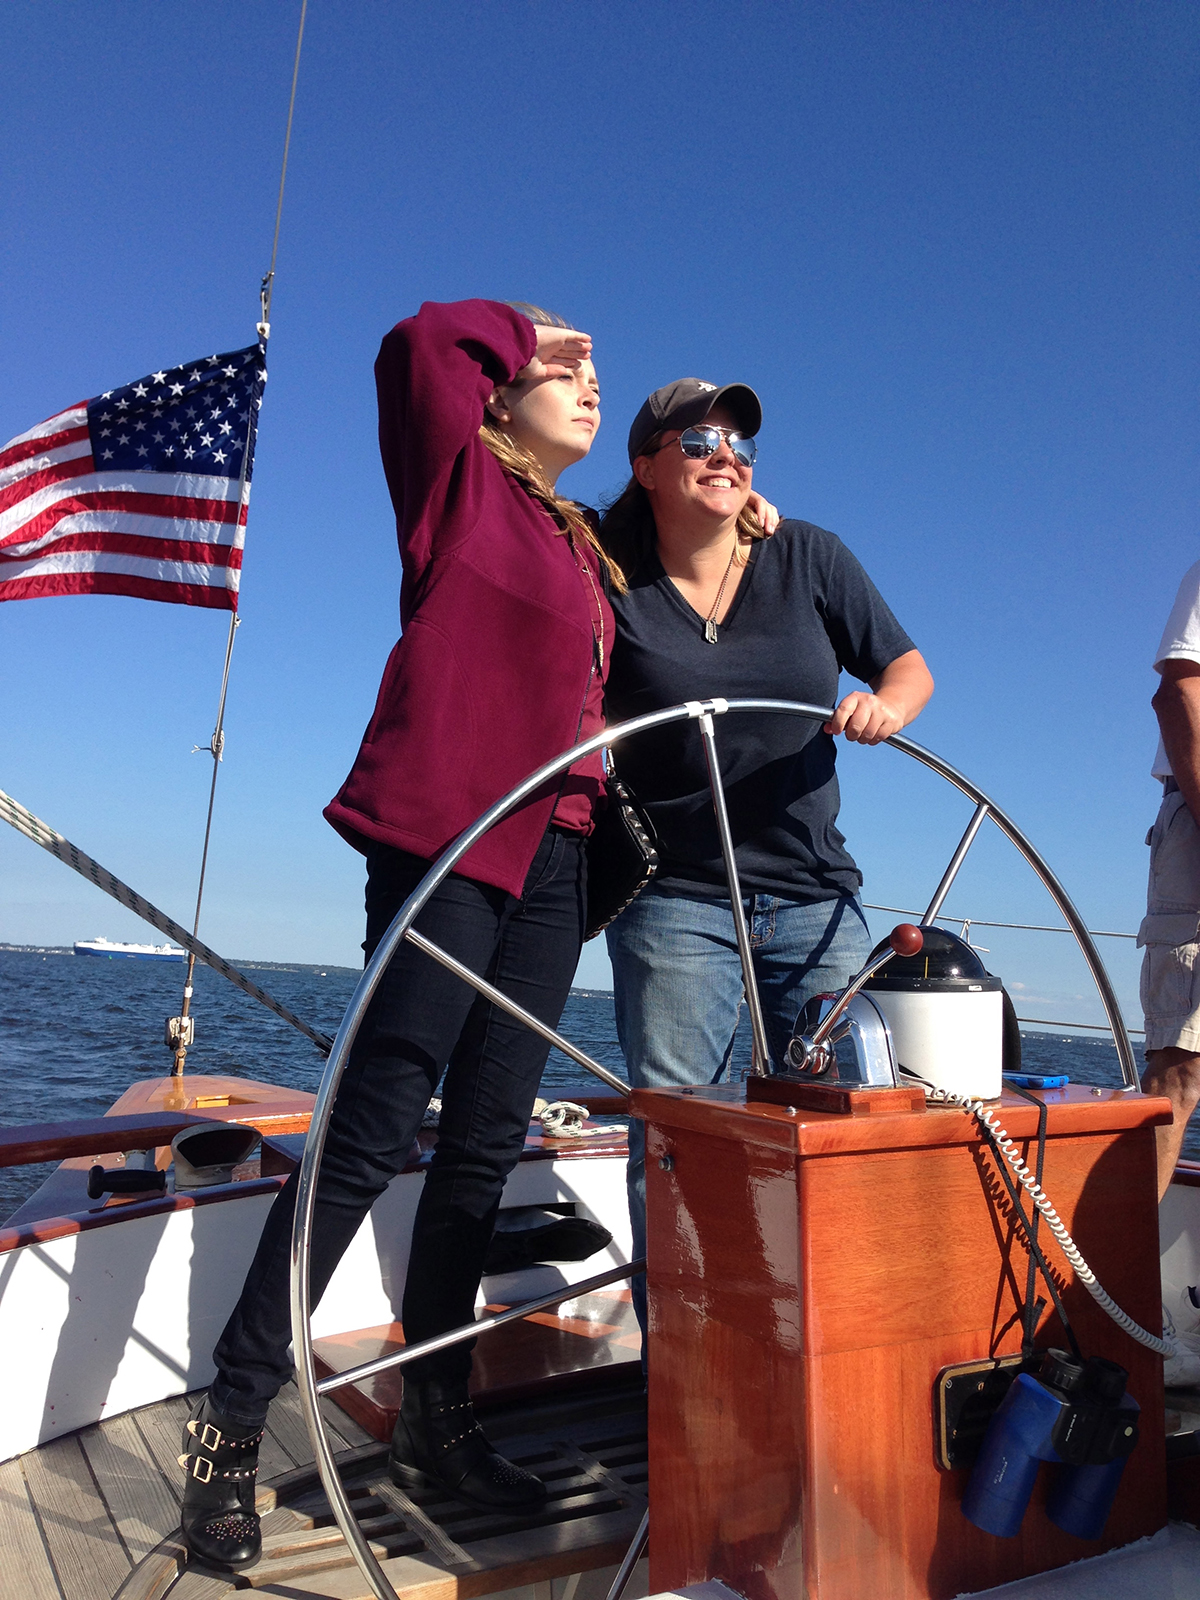 Two women steering the schooner and looking at which way to go